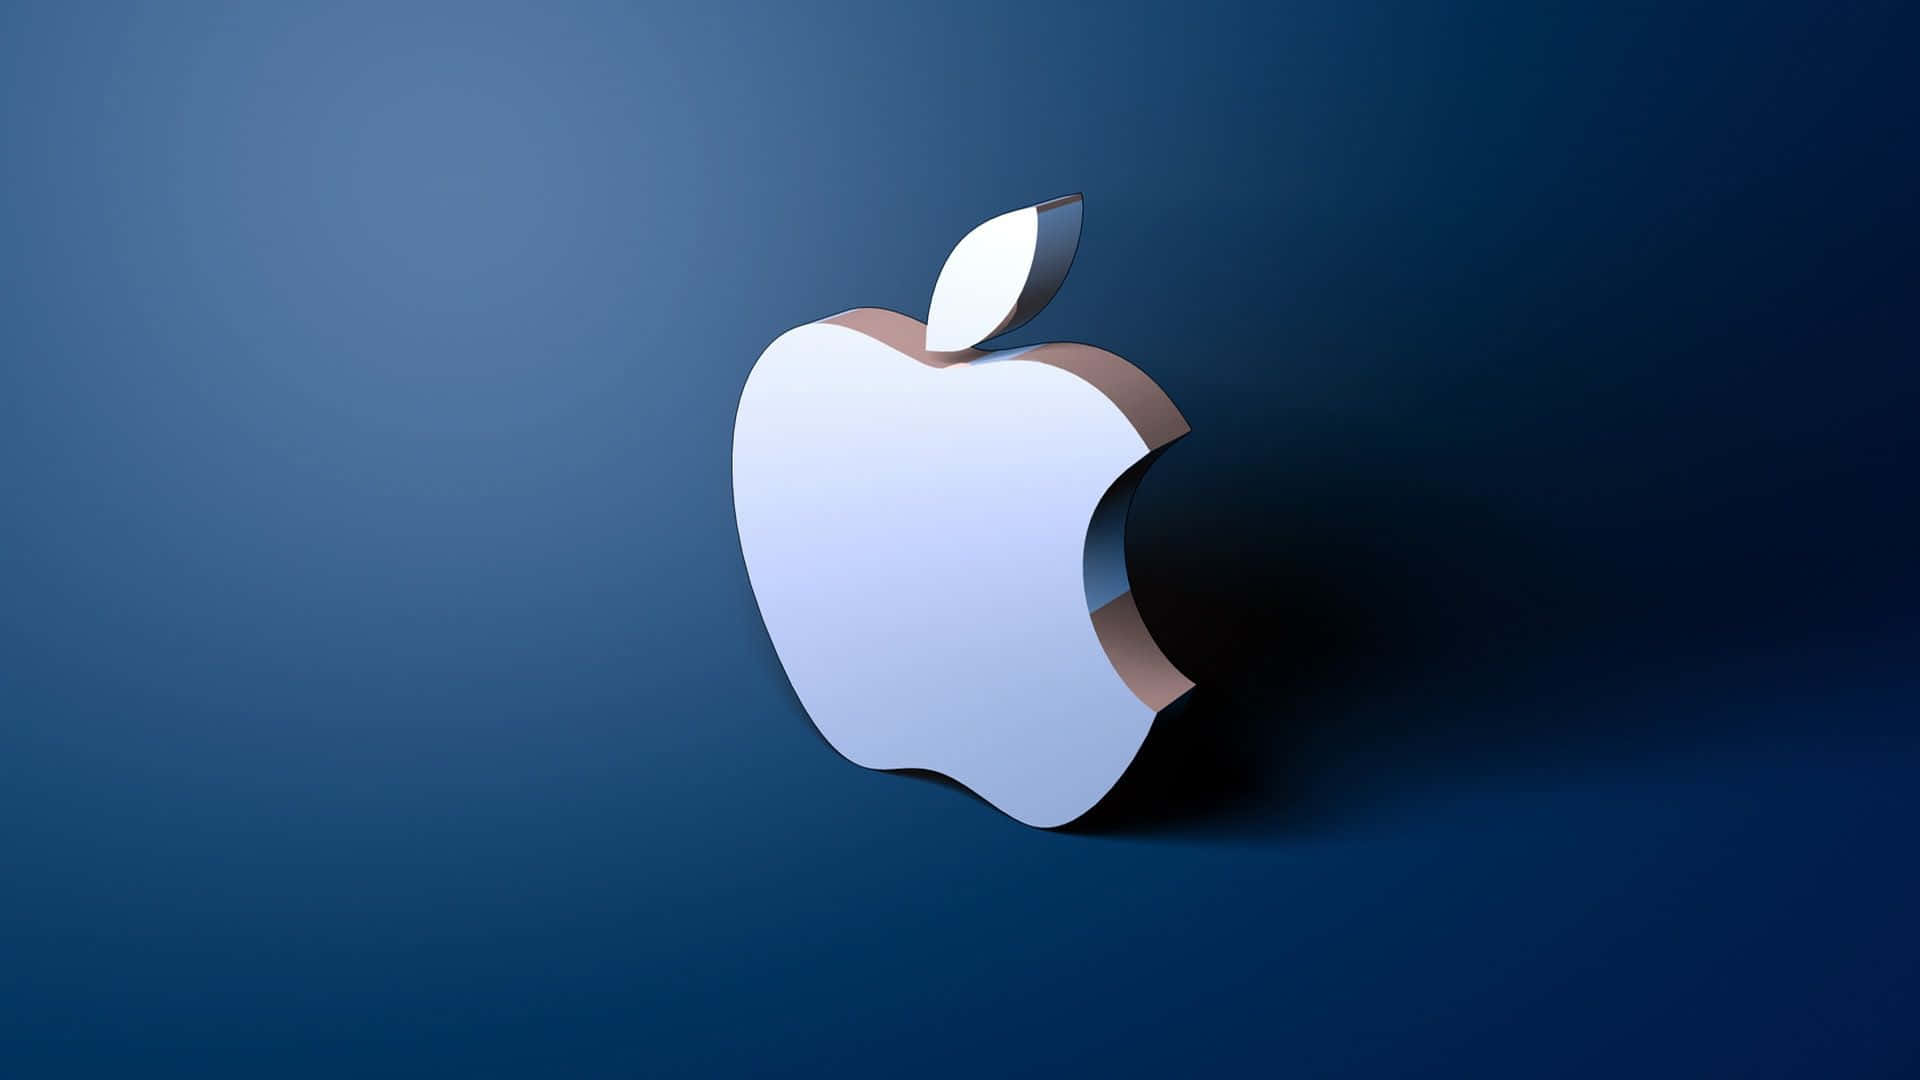 3d Silver Hd Apple Background